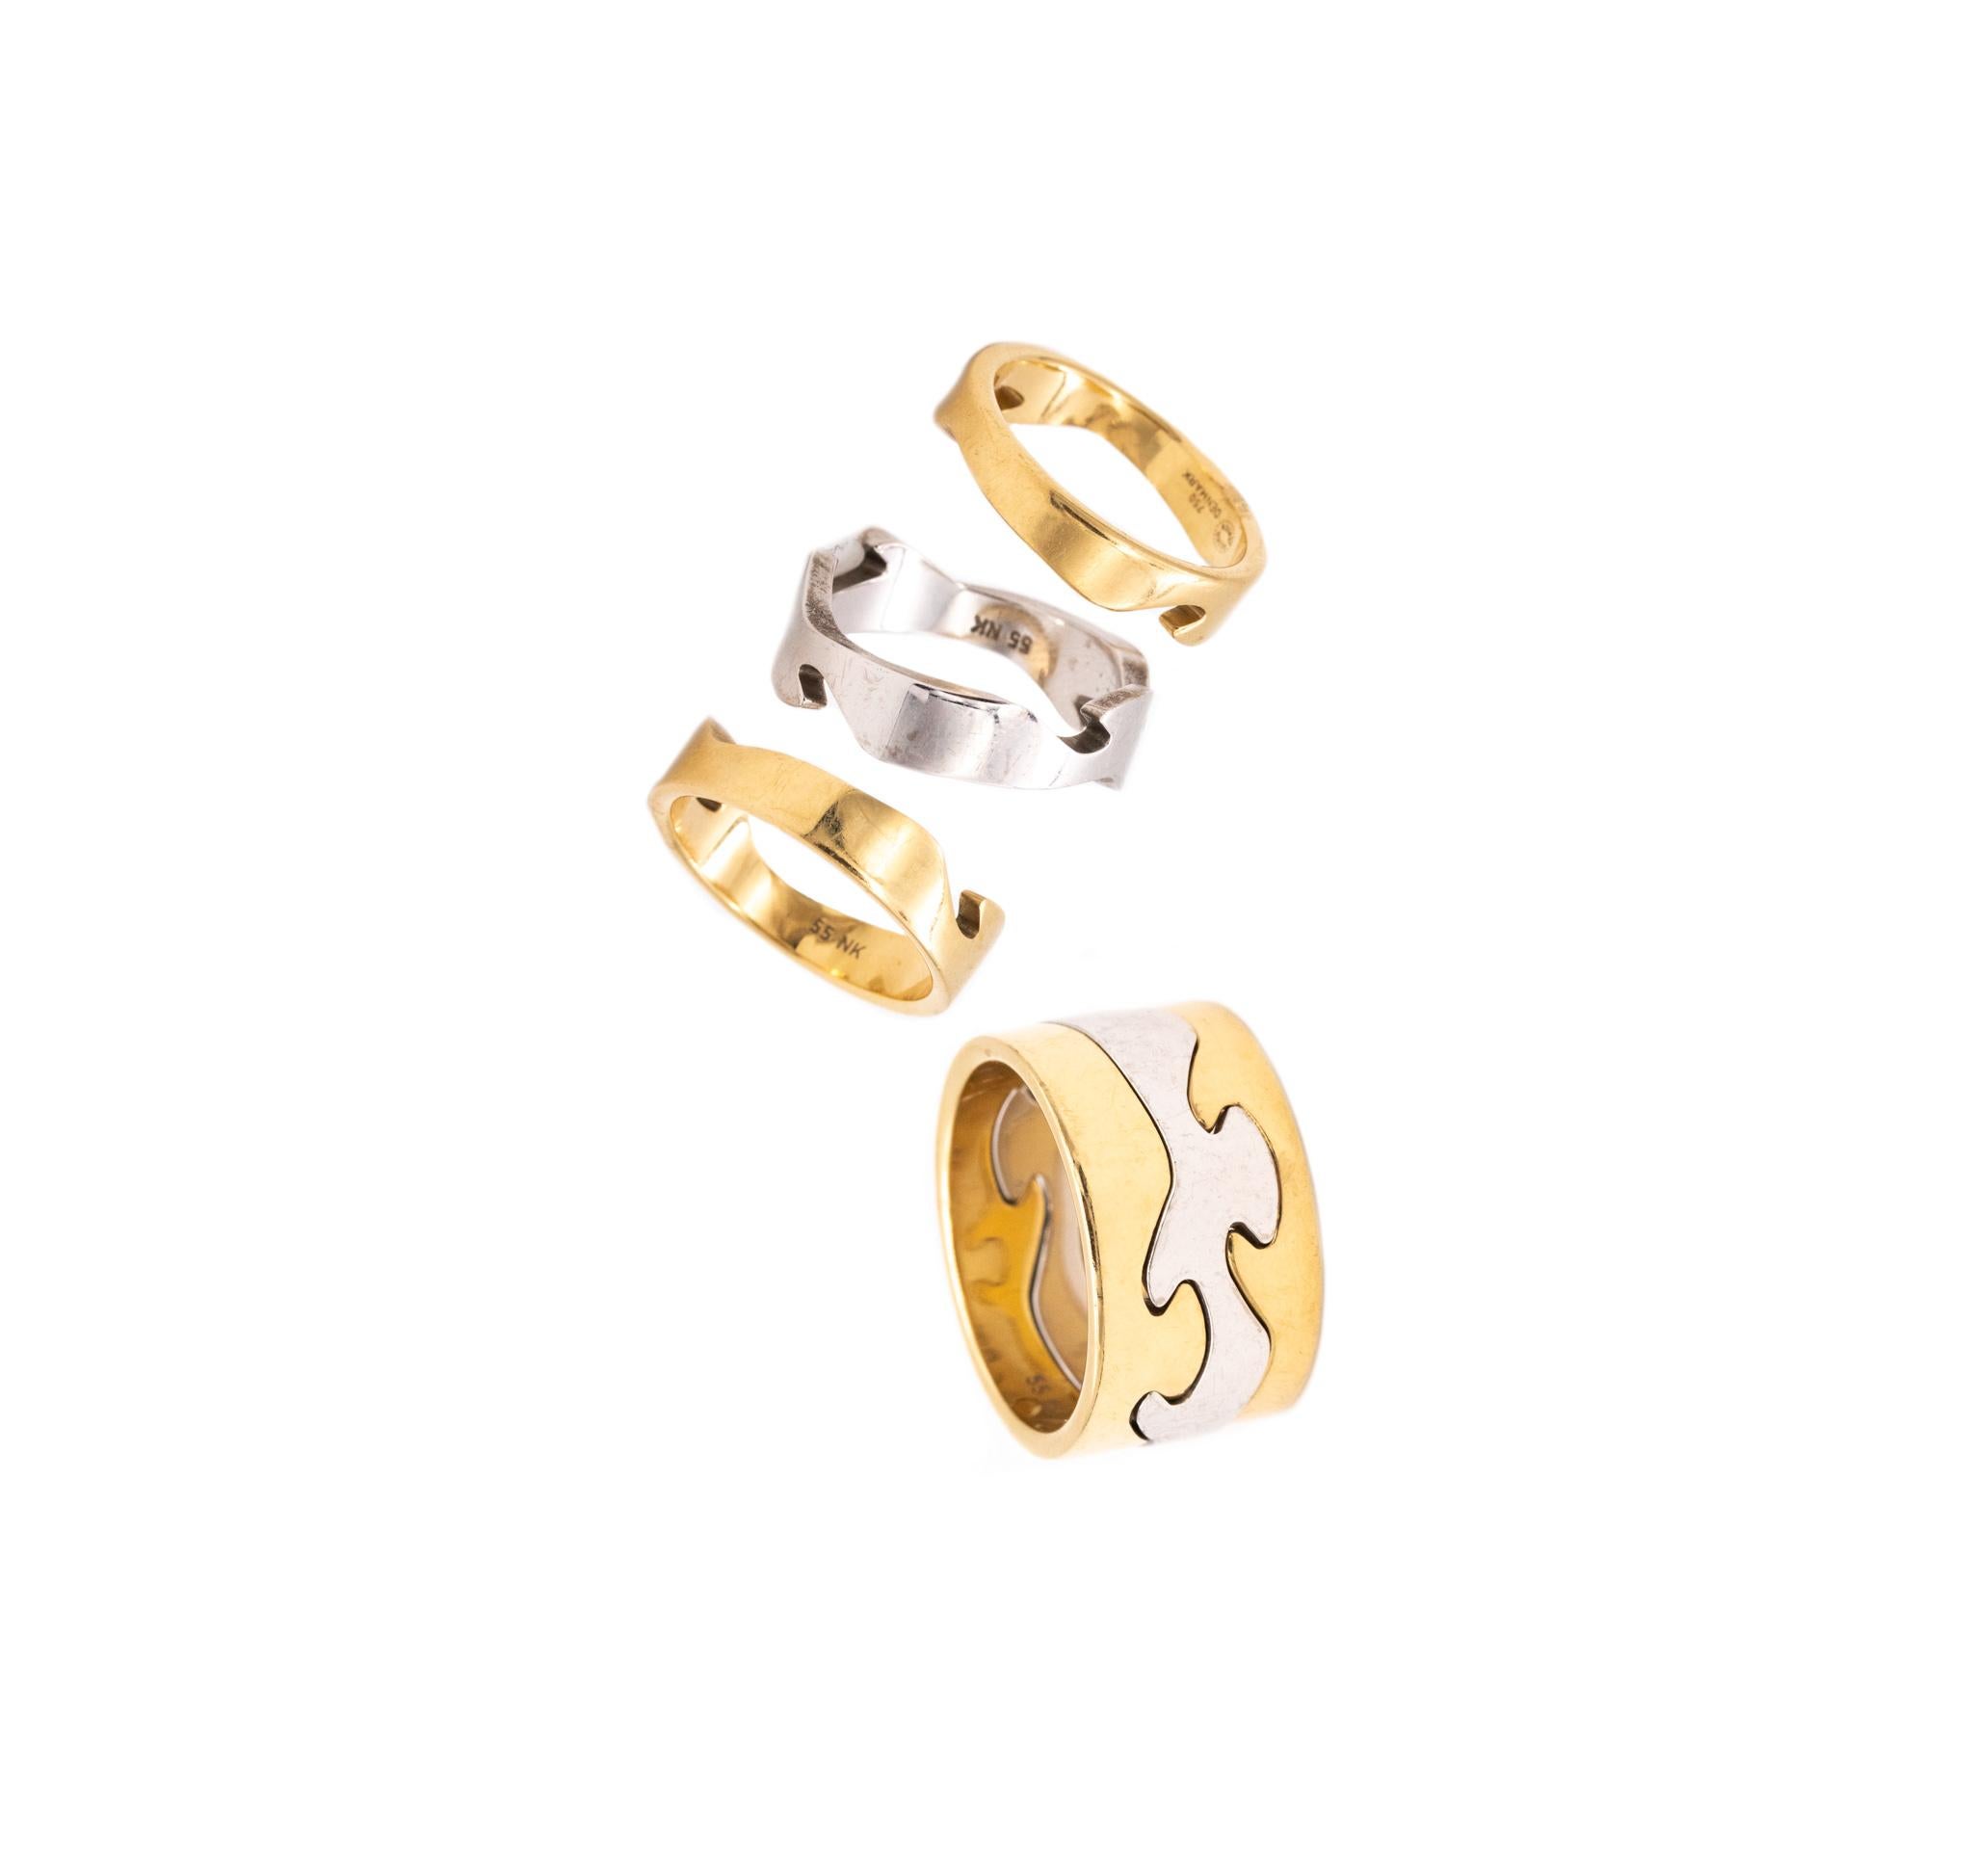 Three-rings set designed by Nina Koppel (1940-1990) for Georg Jensen.

Nice trio designed by Koppel back in the 1970's for the Georg Jensen. Each fusion ring was individually crafted in solid 18 karats of yellow and white gold, with high polished